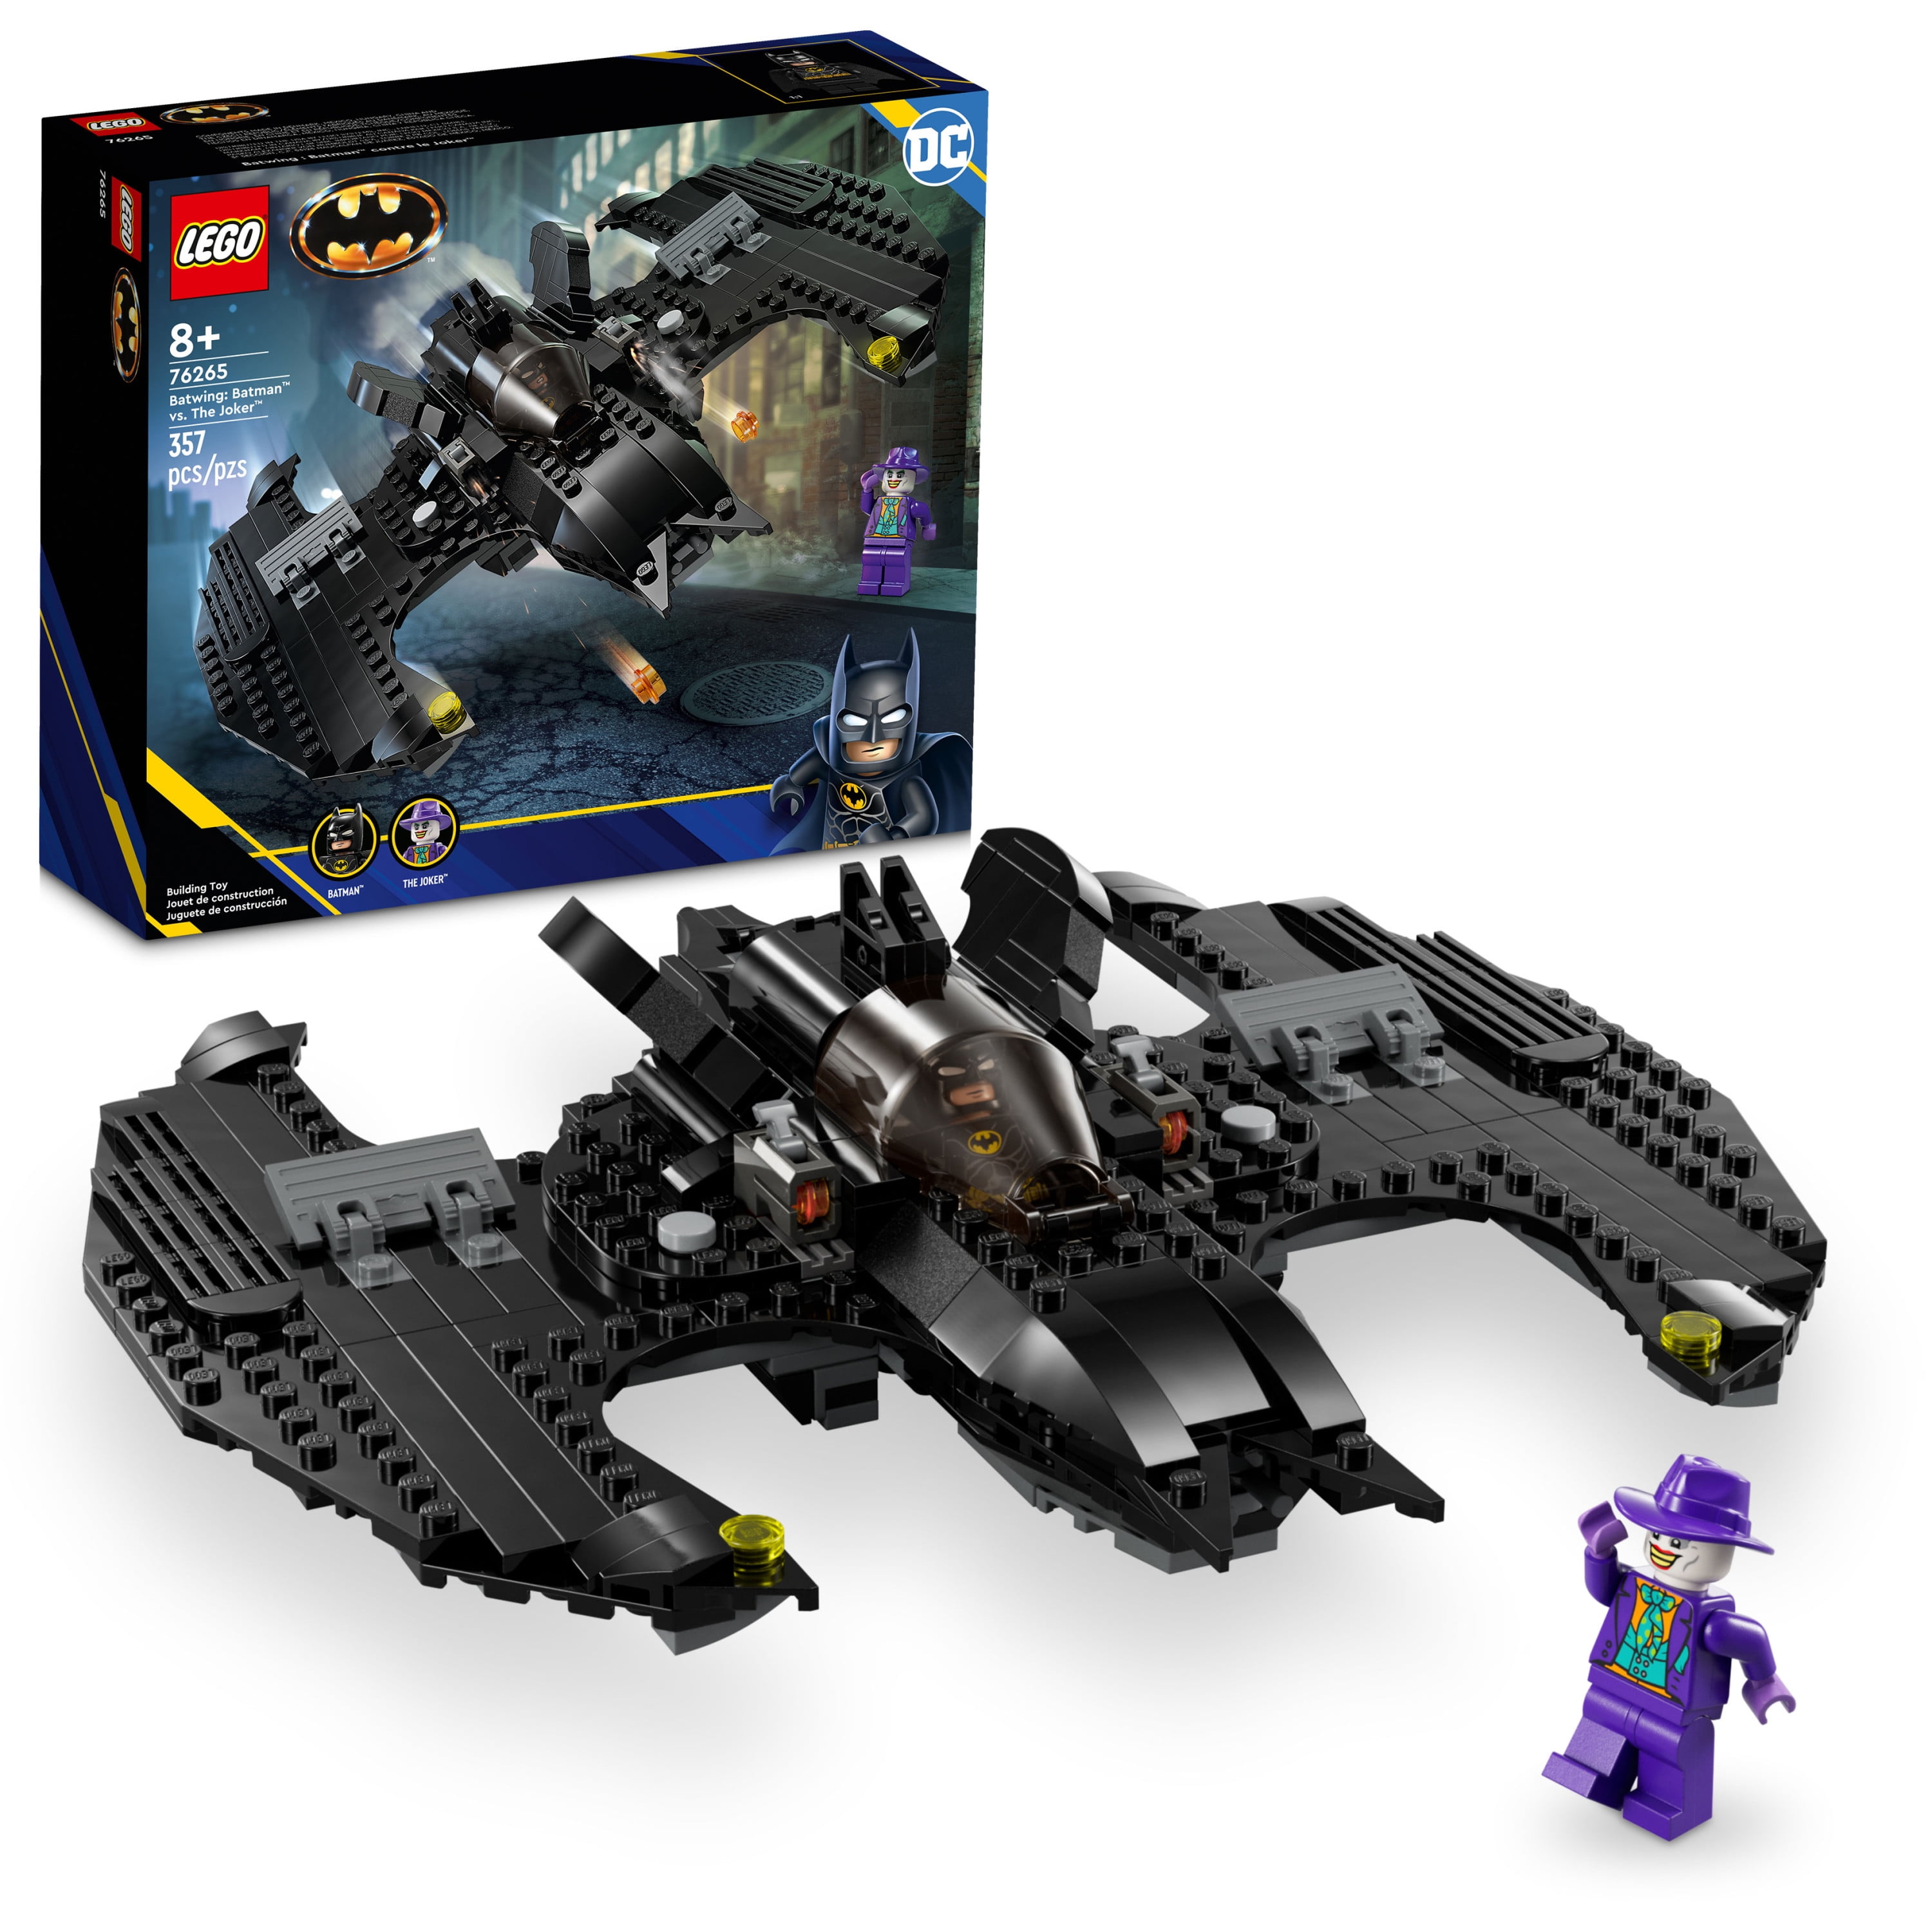 Lego Batman Movie - Compilation of all Sets - The complete Theme